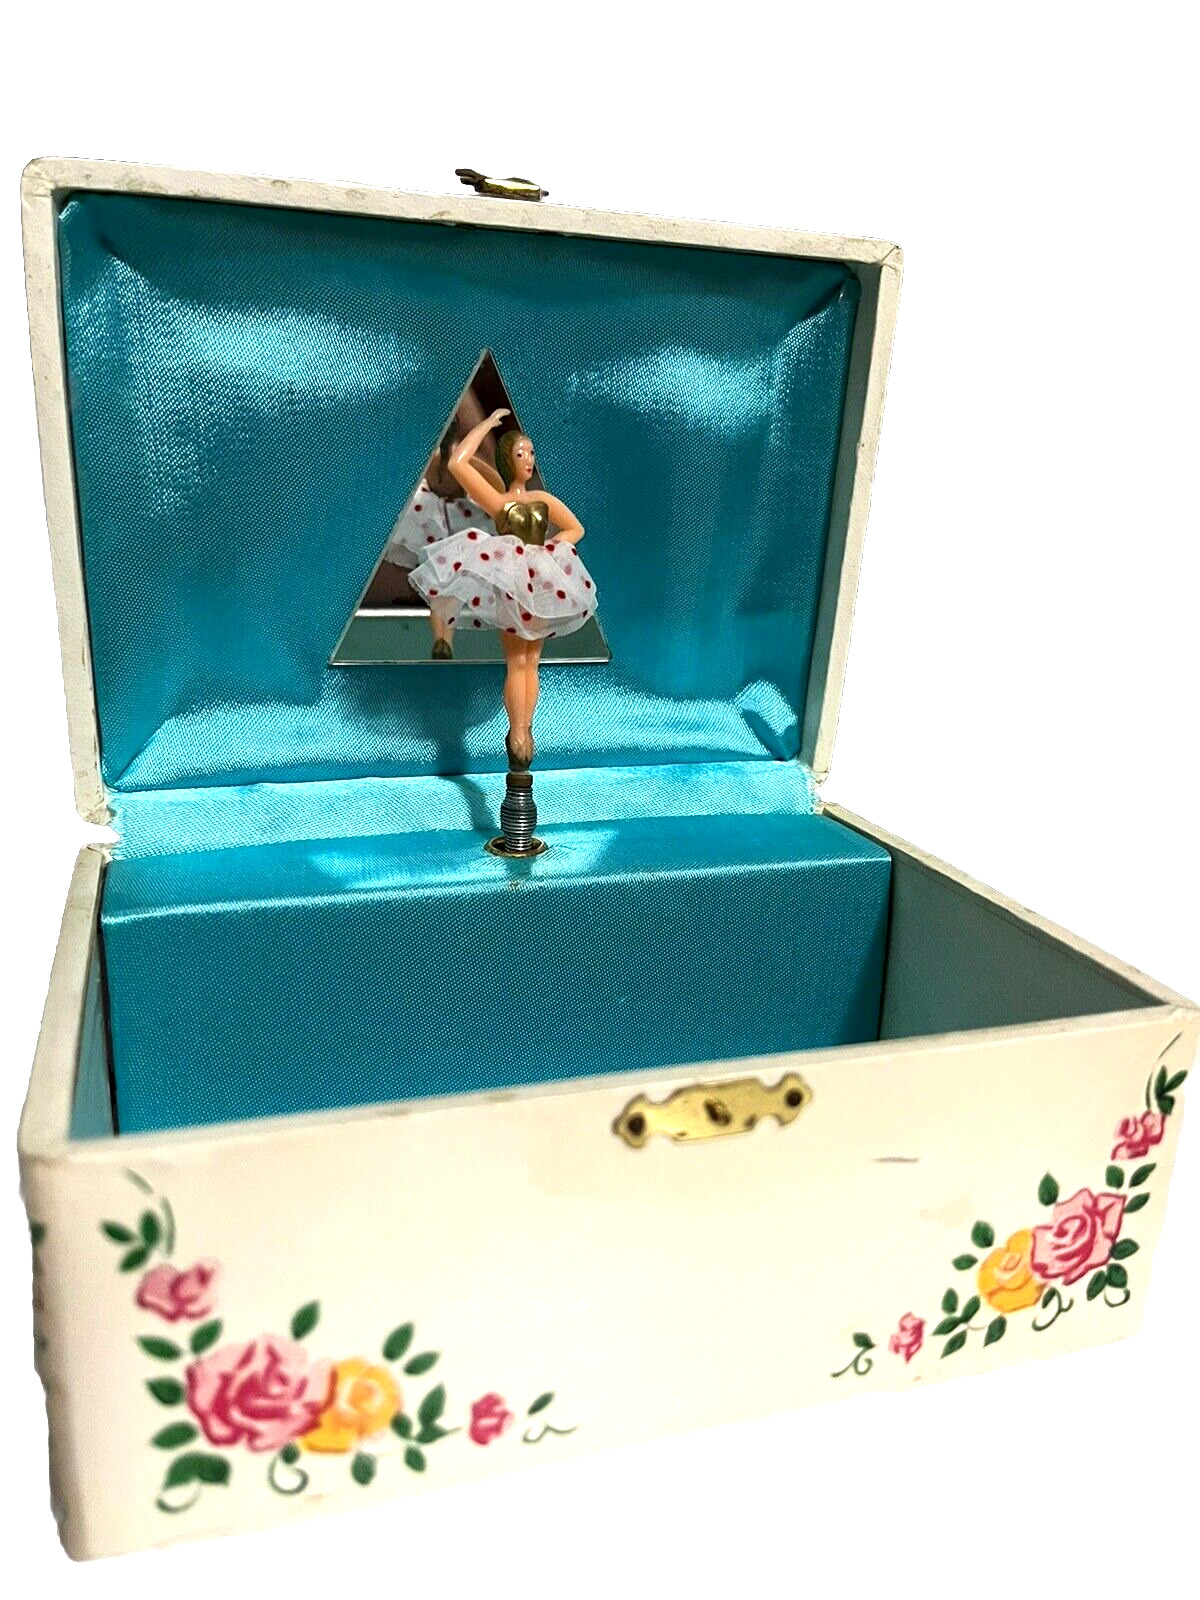 SPINNING BALLERINA SOME ENCHANTED EVENING MUSIC JEWELRY BOX 1960-1970s SEE VIDEO